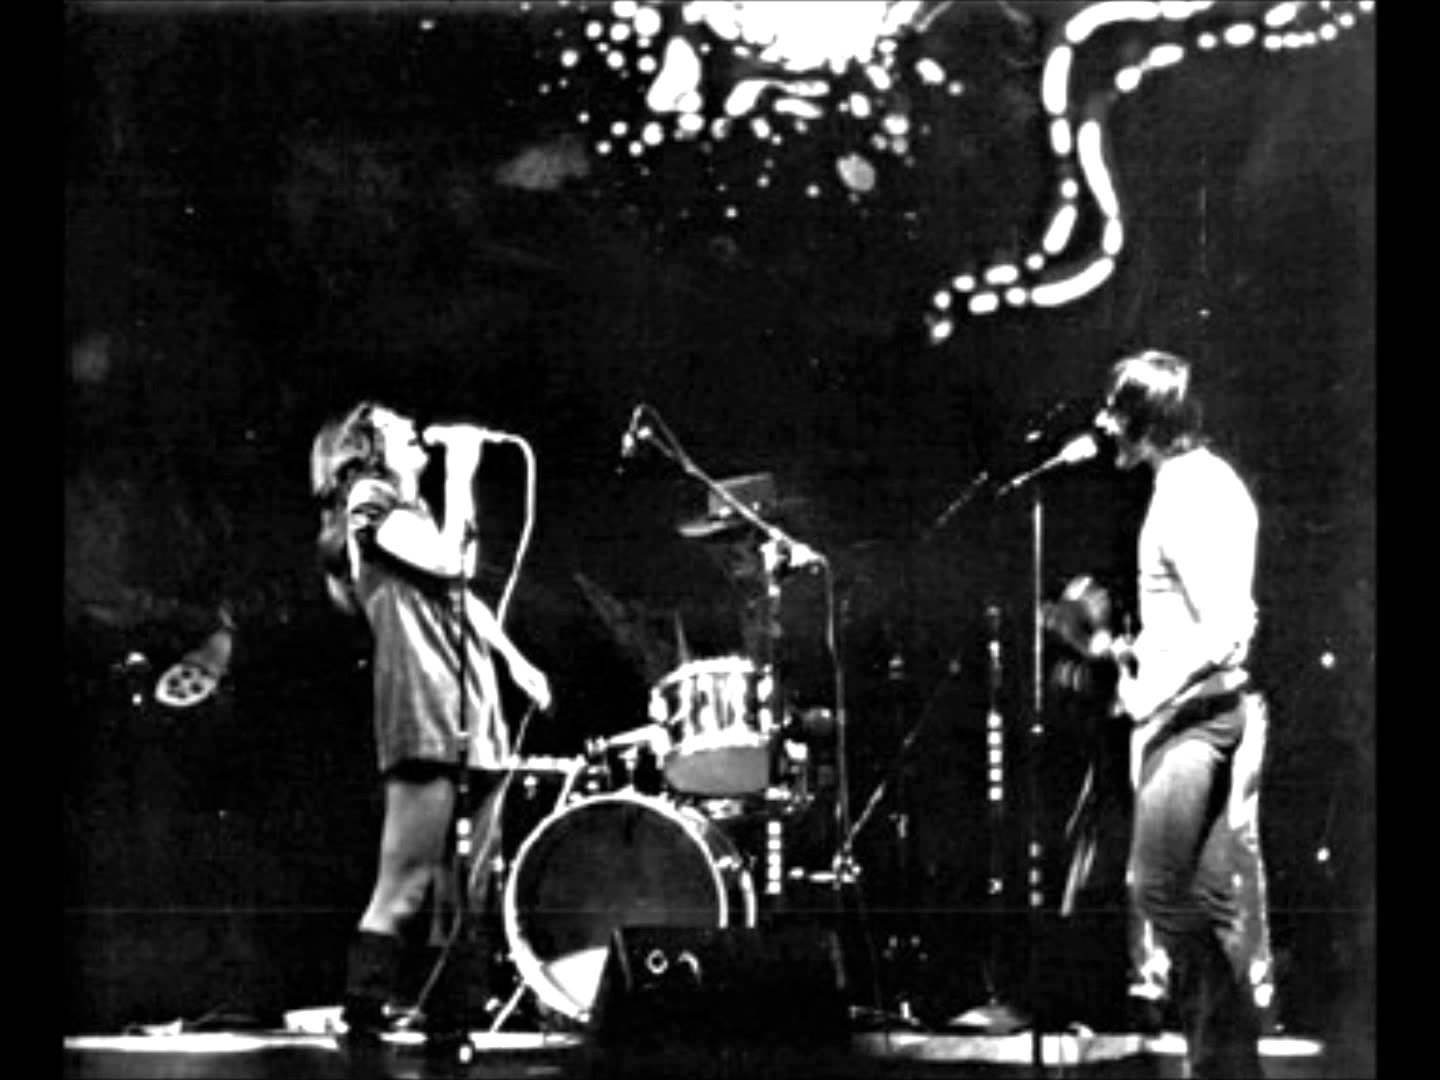 Jefferson AirplaneLive at The Fillmore West November 5 1968